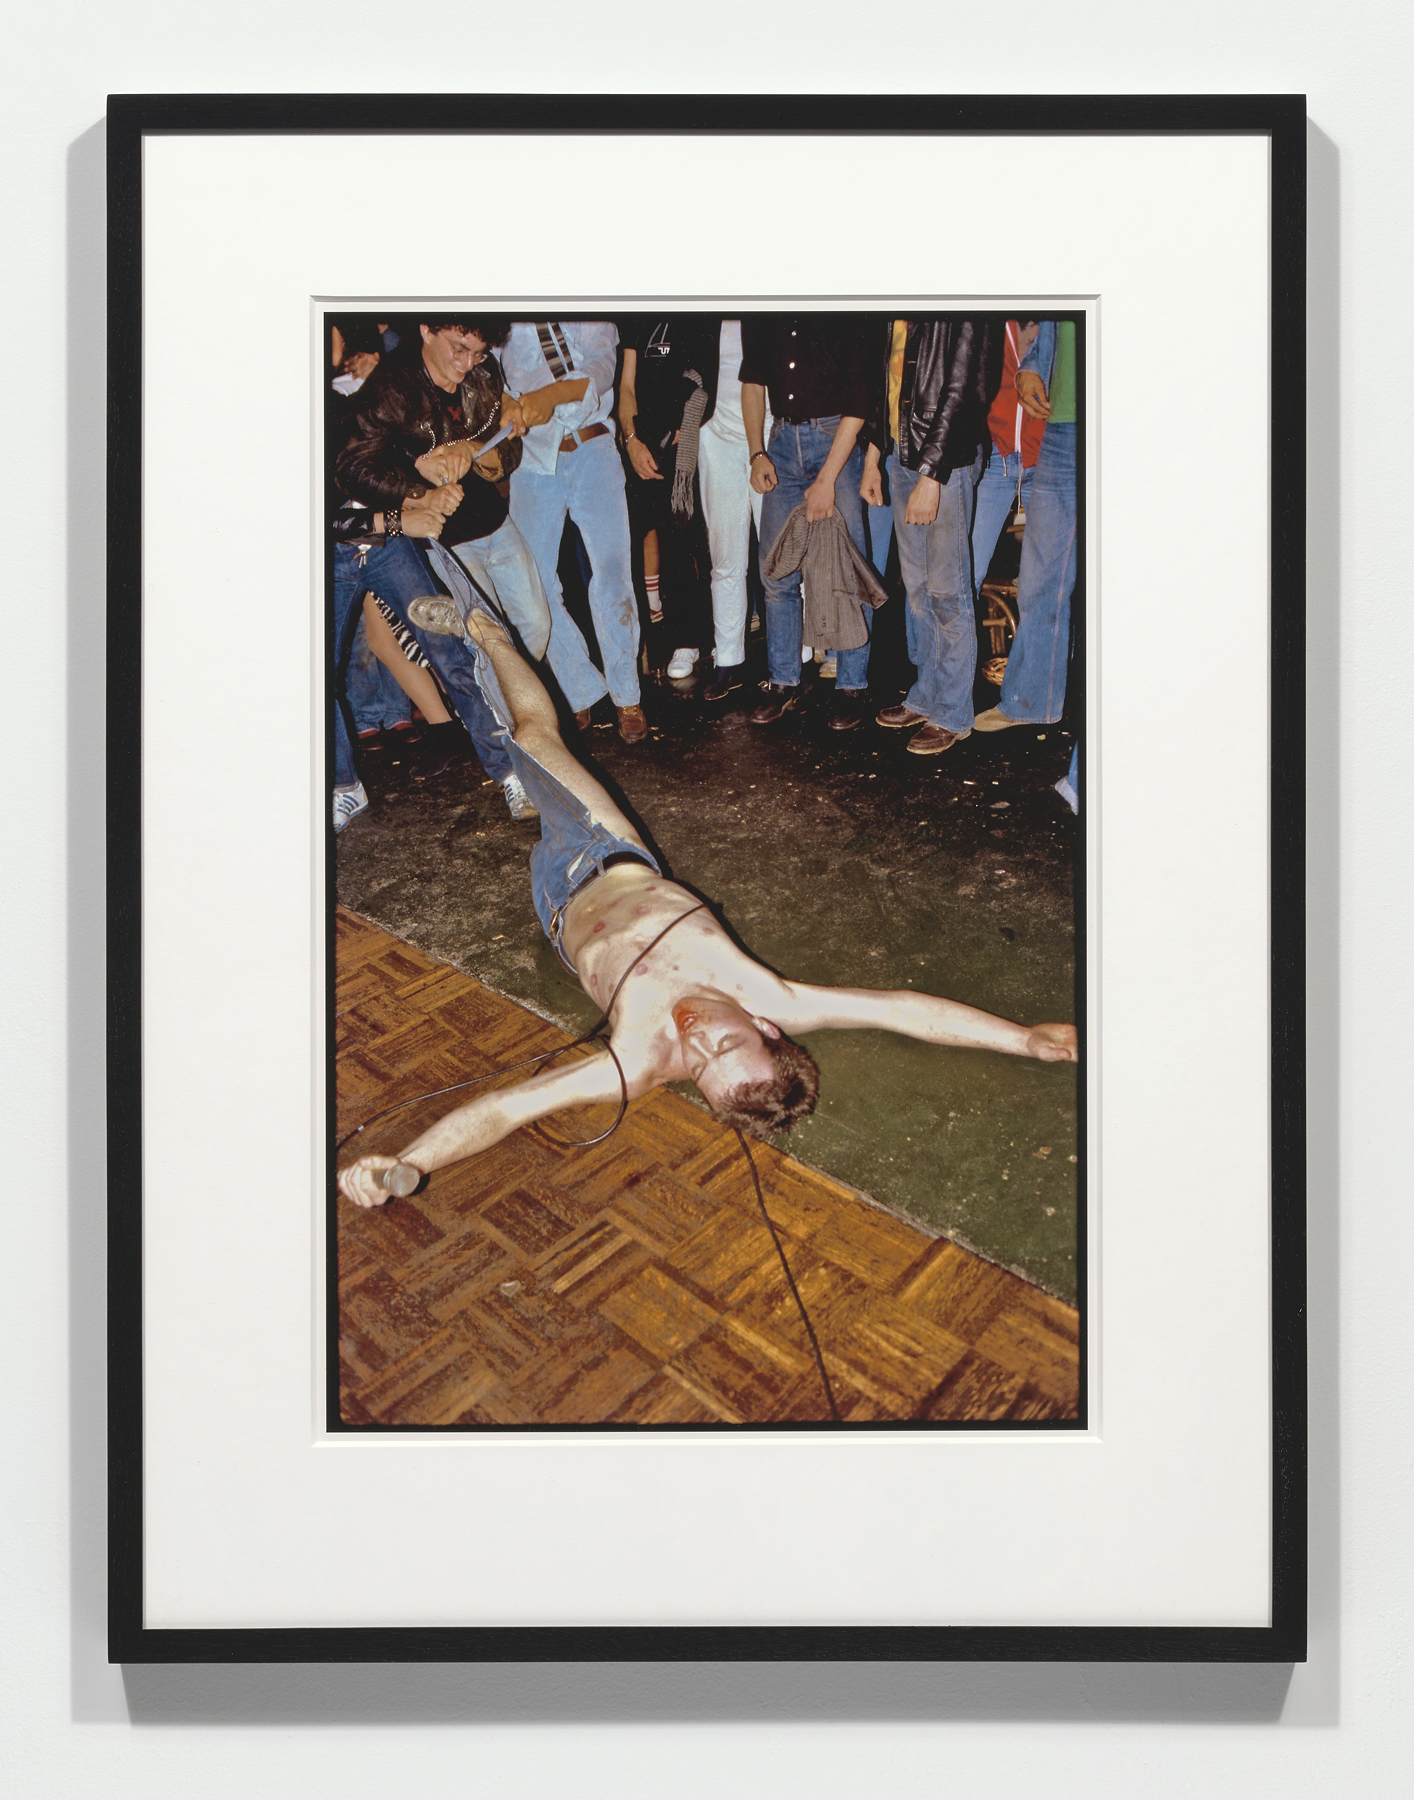 Bruce Conner BIAFRA, AUGUST 13, 1978, 2011 | pigmented inkjet print 22 x 17 inches (Edition of 5, 1/2 AP)